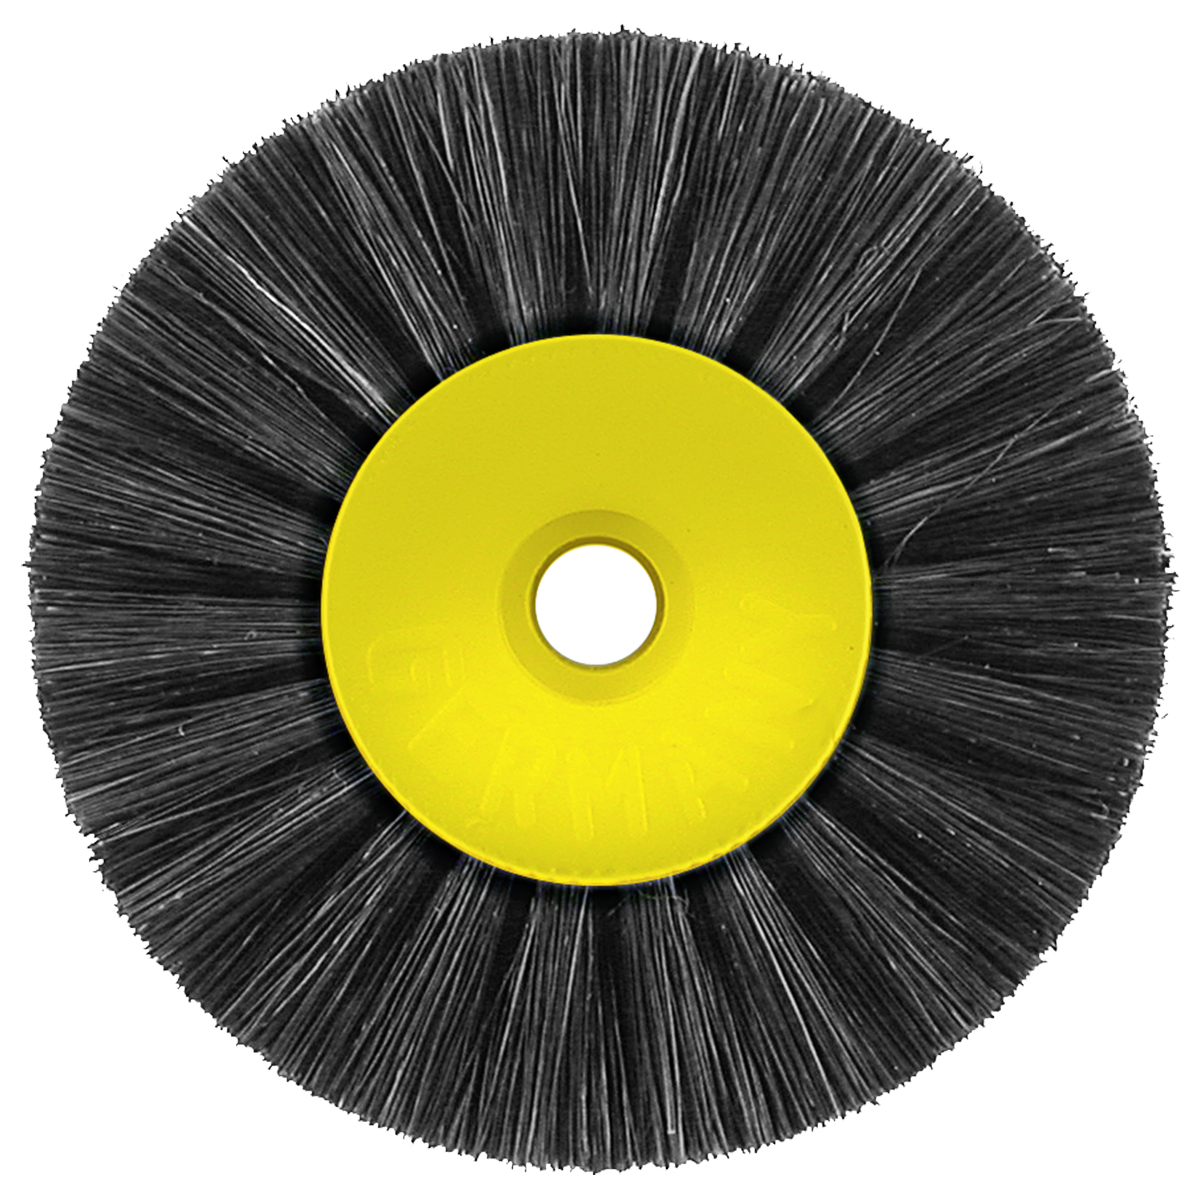 HoPla Chungking brushes black 70 mm with plastic centre